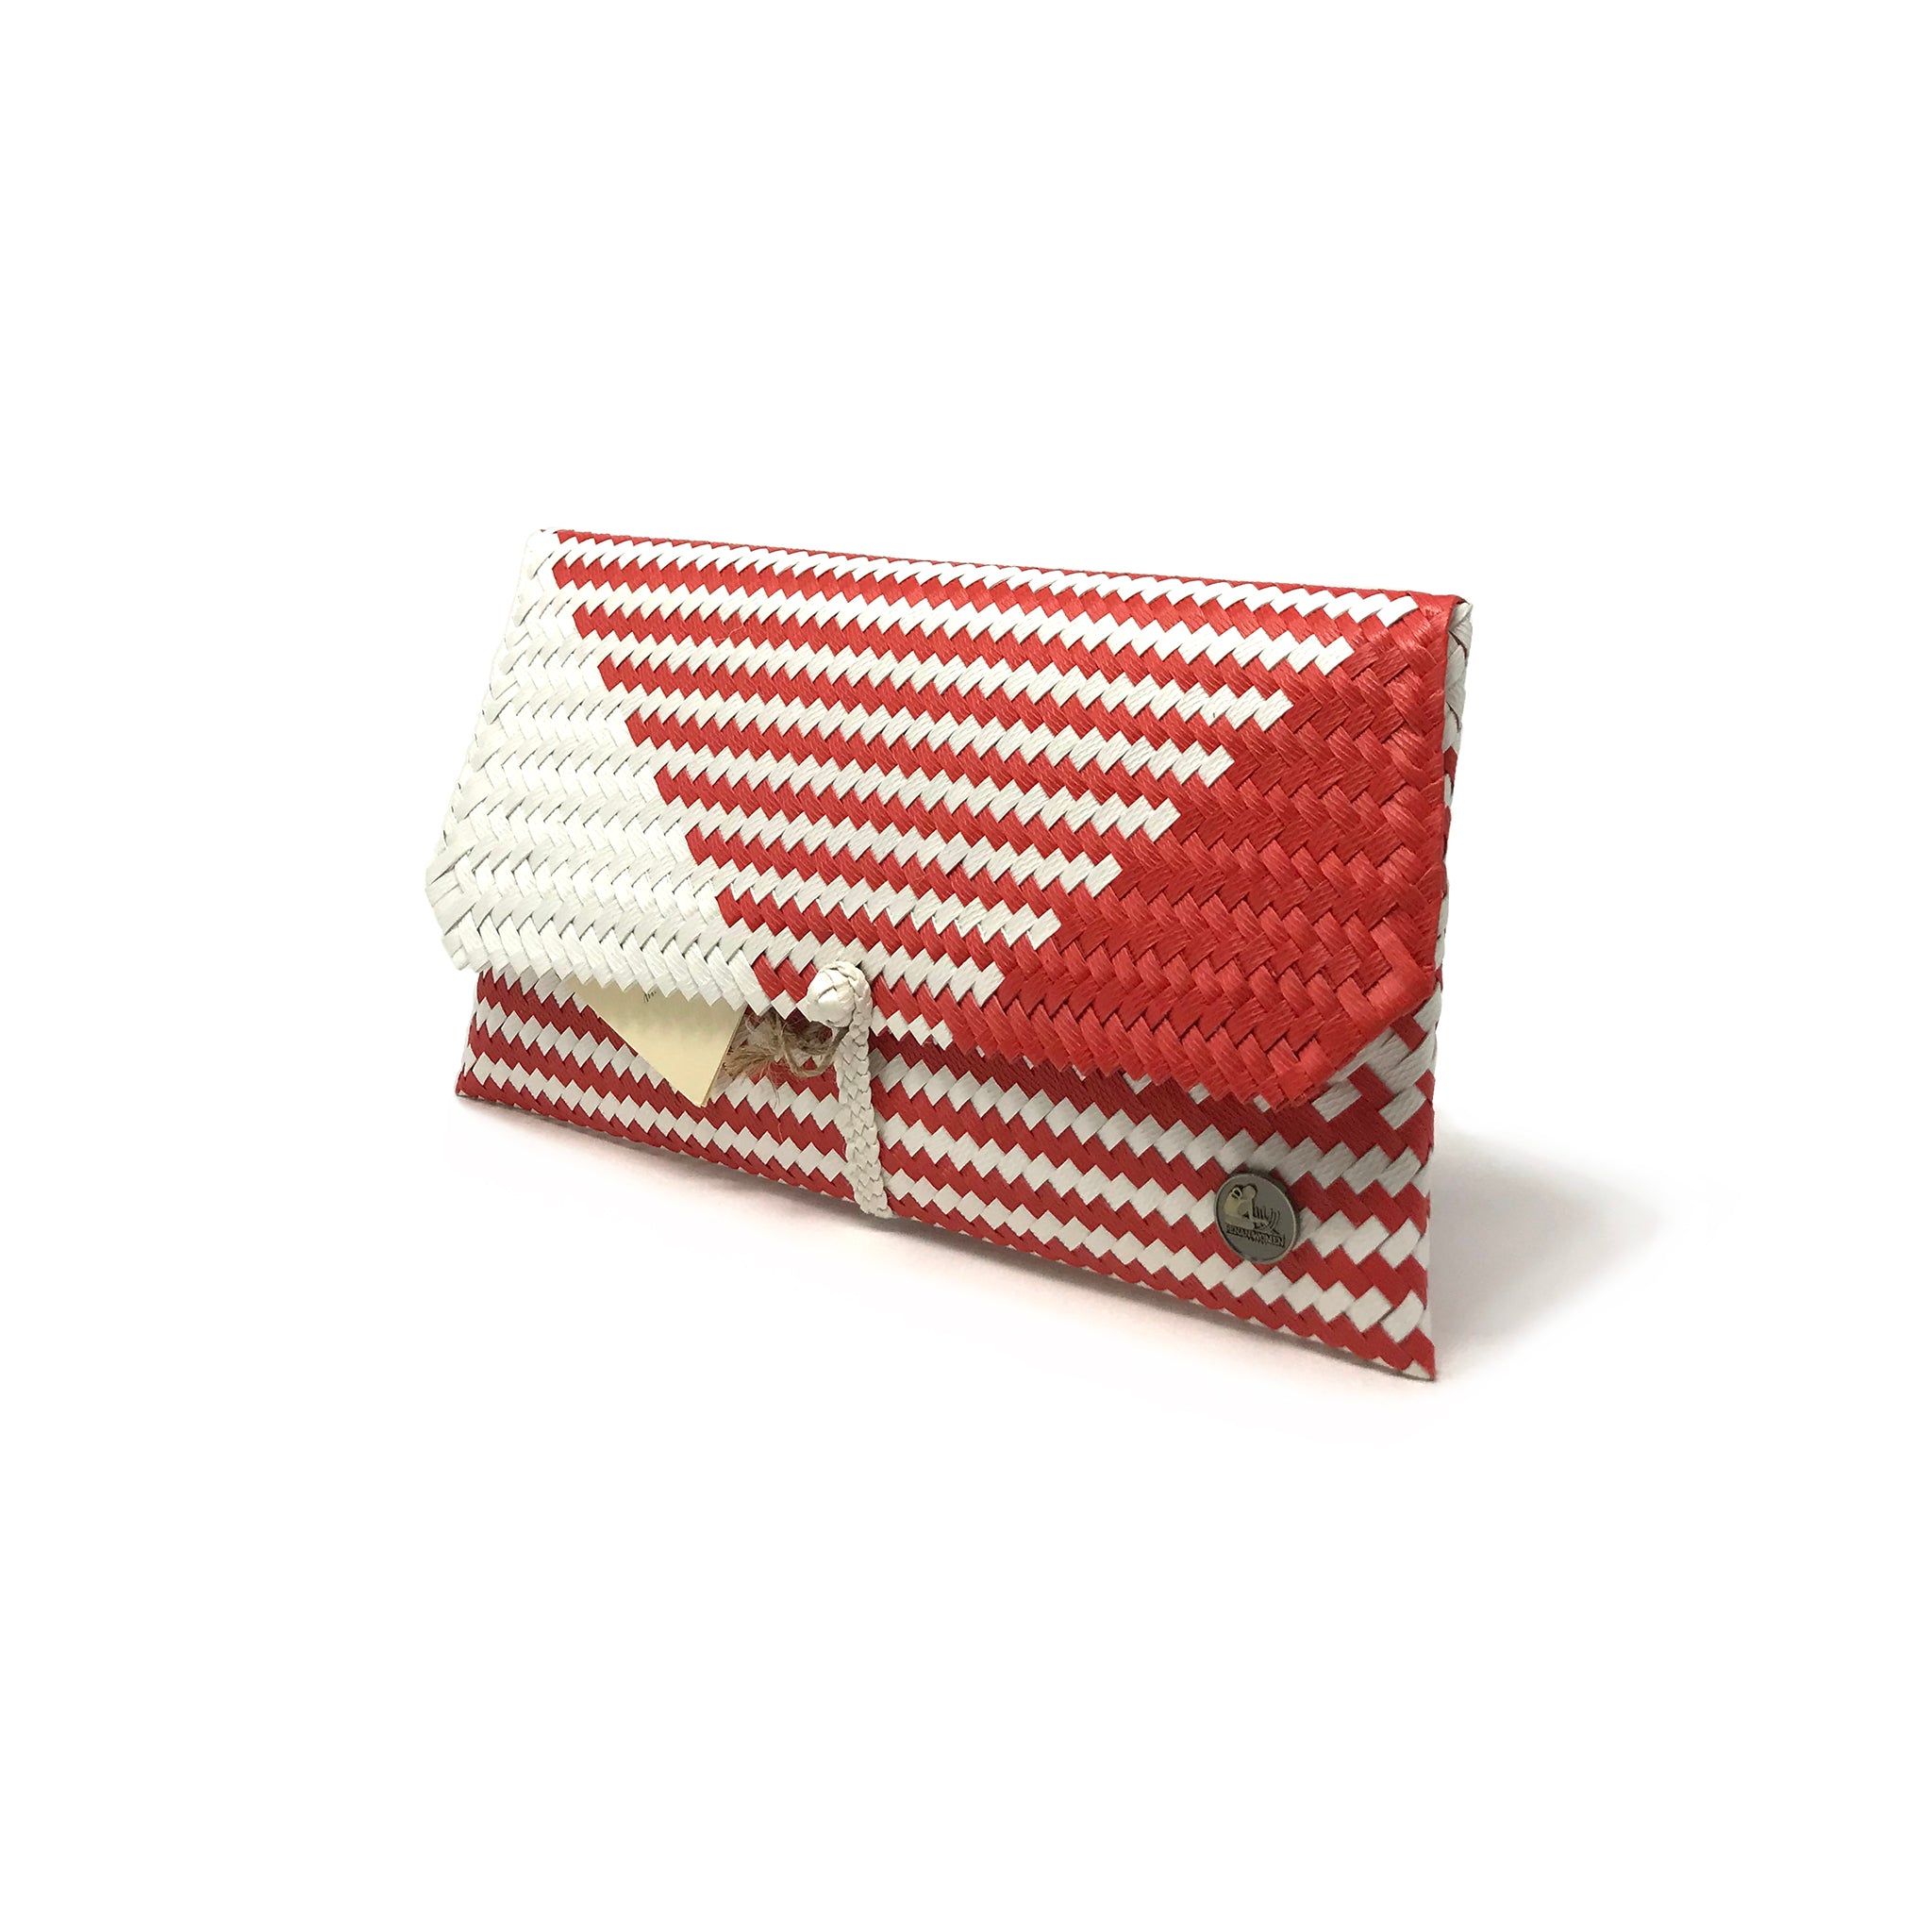 Red and white clutch at a 45-degree angle.